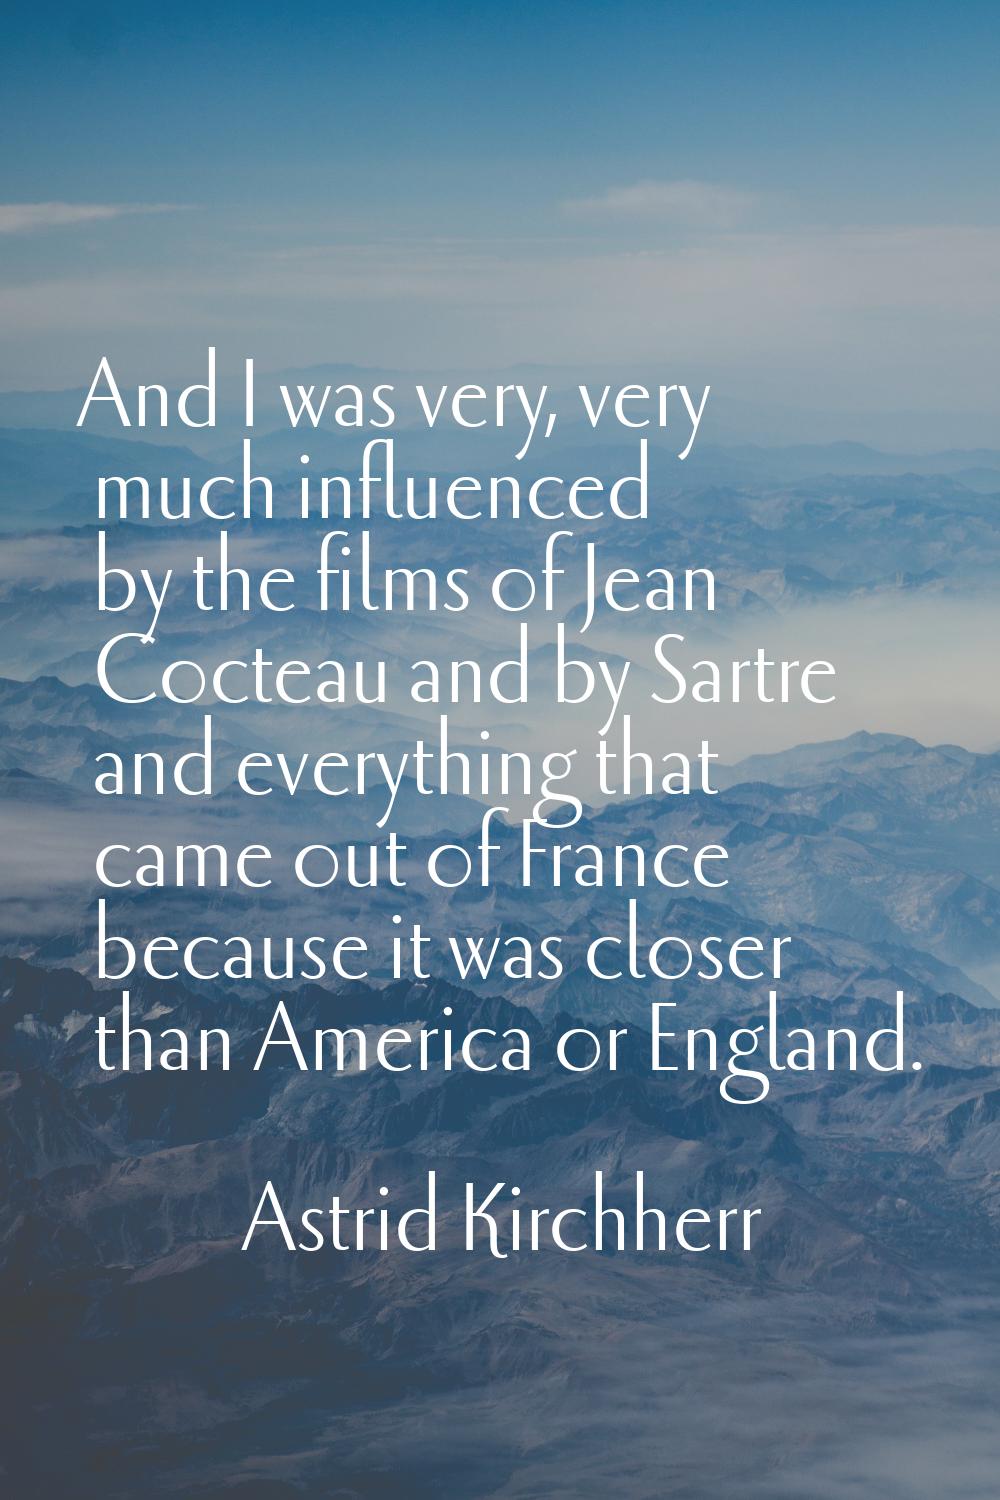 And I was very, very much influenced by the films of Jean Cocteau and by Sartre and everything that